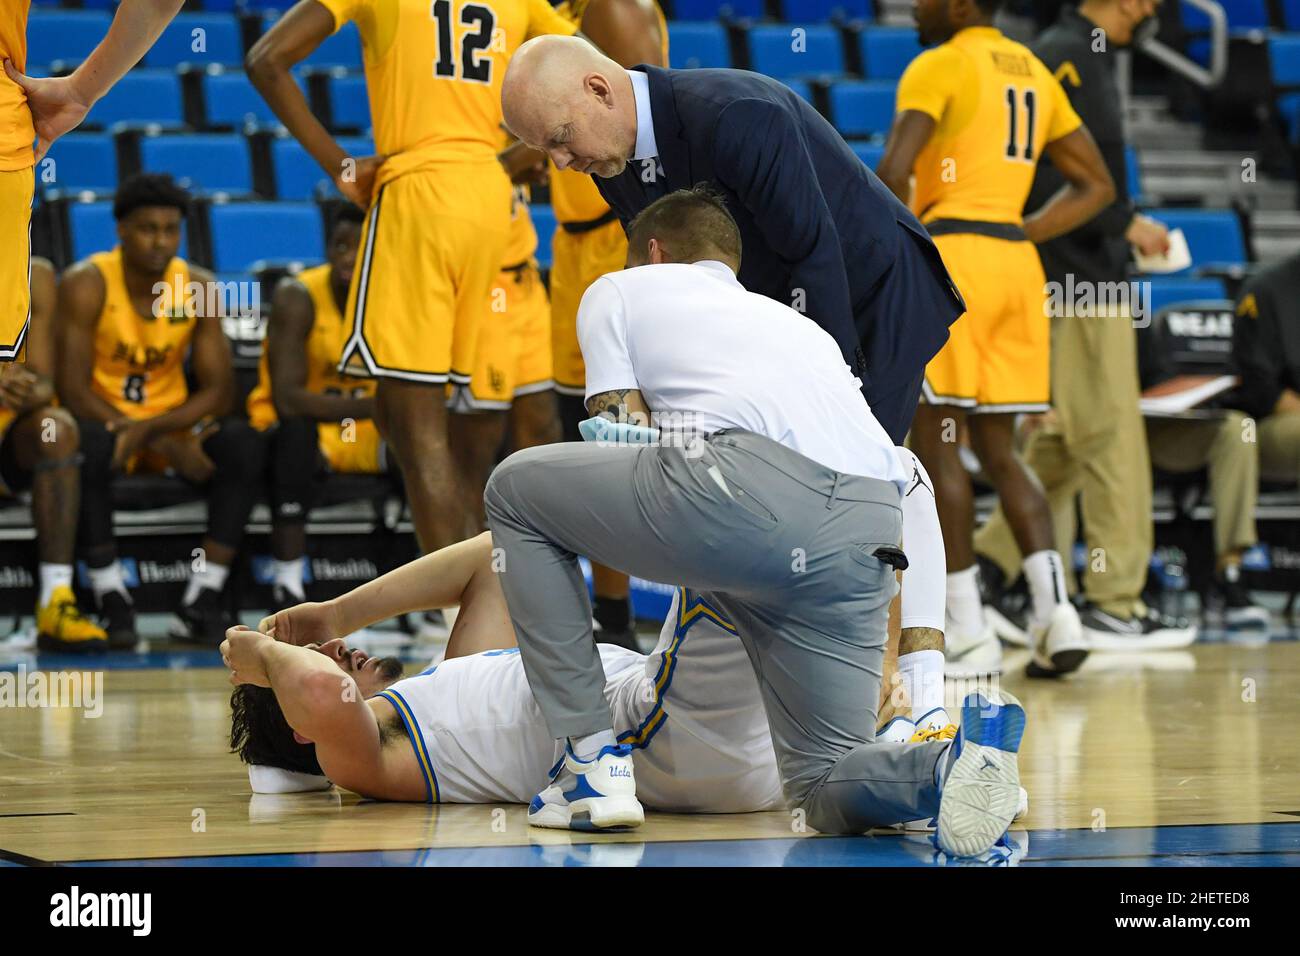 UCLA Bruins guard Jaime Jaquez Jr. (24) holds his ankle during an NCAA basketball game against the Long Beach State 49ers, Thursday, Jan. 6, 2022, in Stock Photo